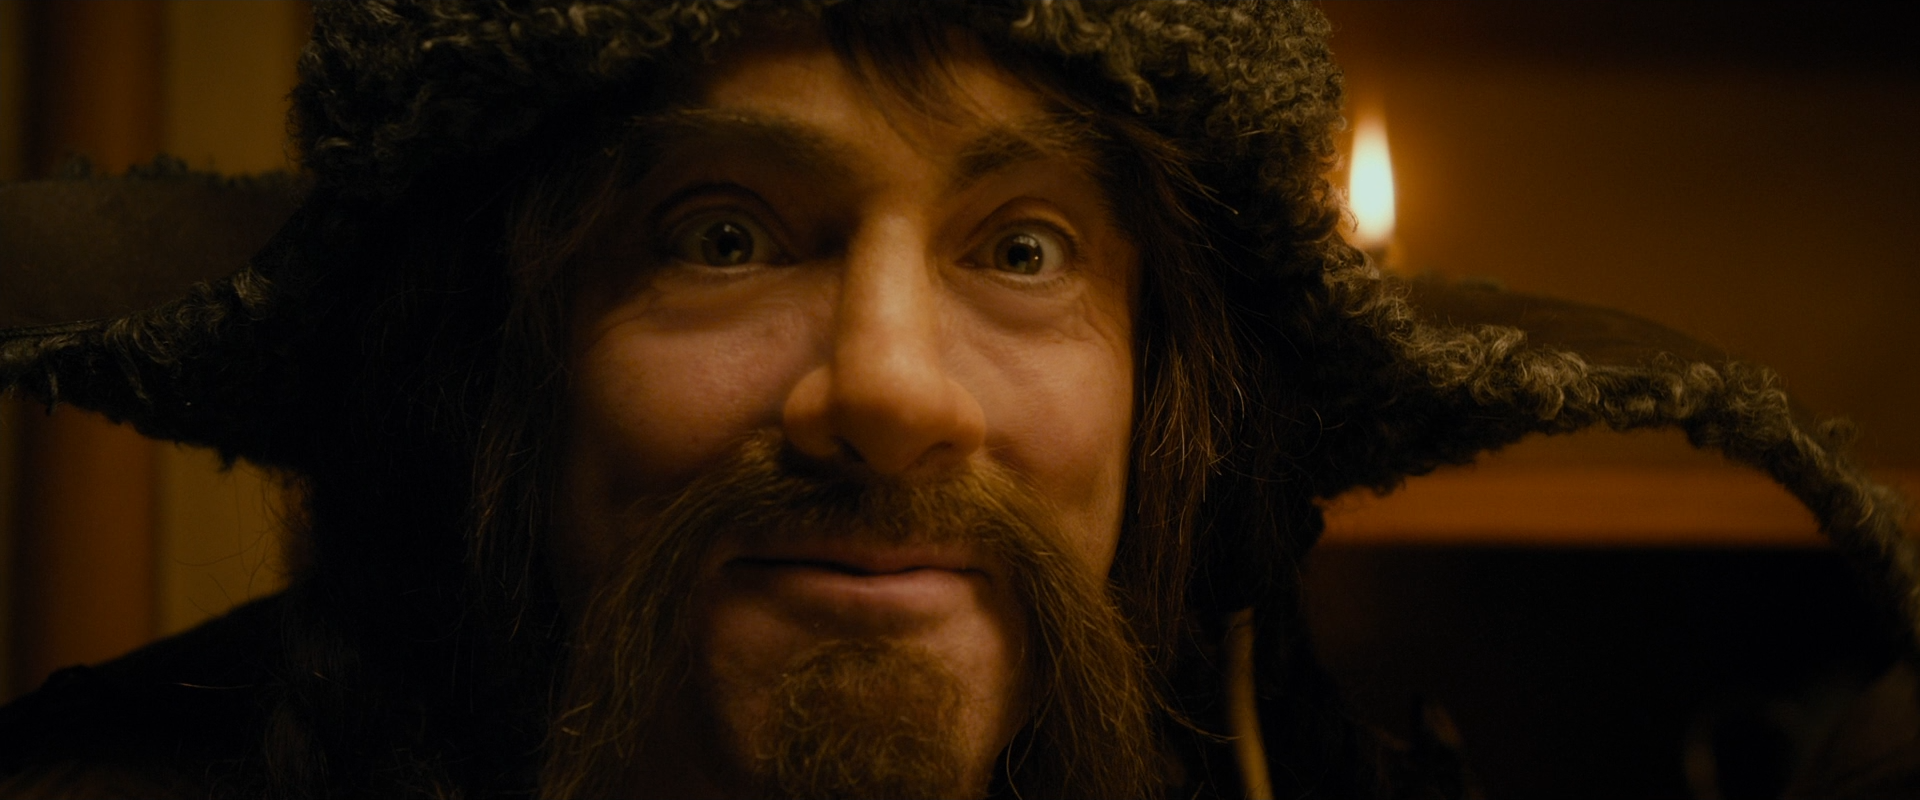 The Hobbit An Unexpected Journey 2012 1080p Theatrical Bluray Remux AVC DTS HD MA 7 1